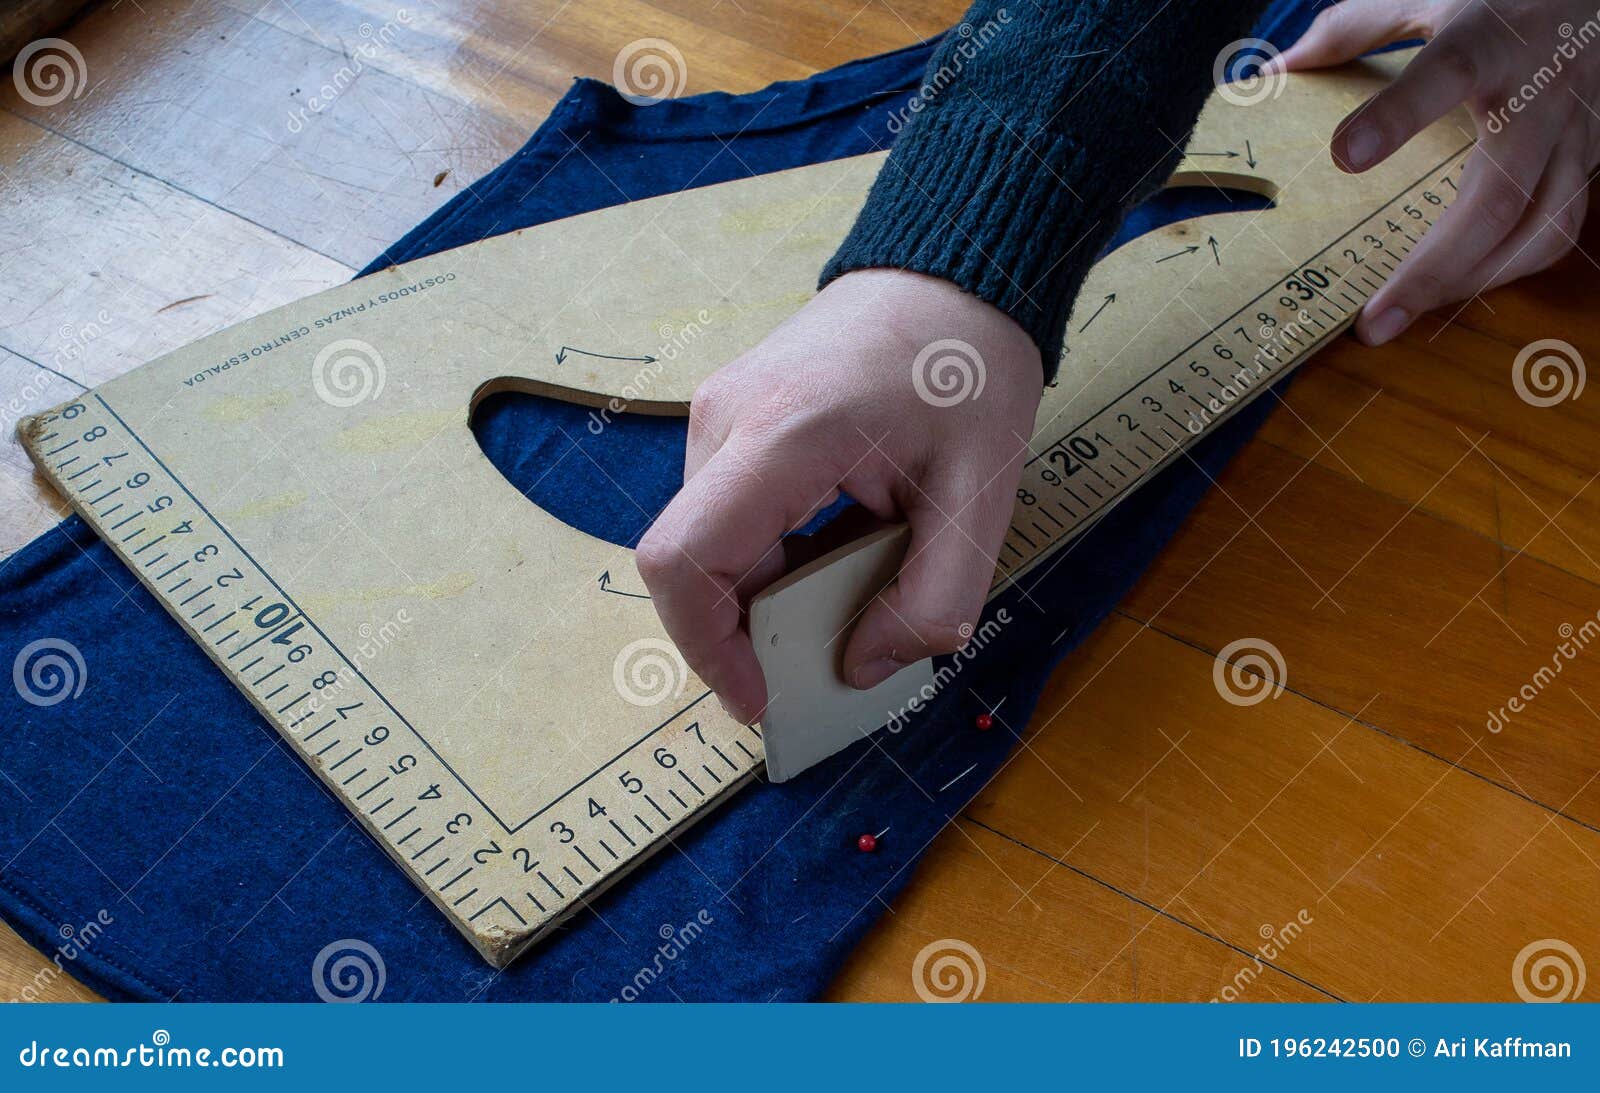 woman takes measurements  of a blue cloth